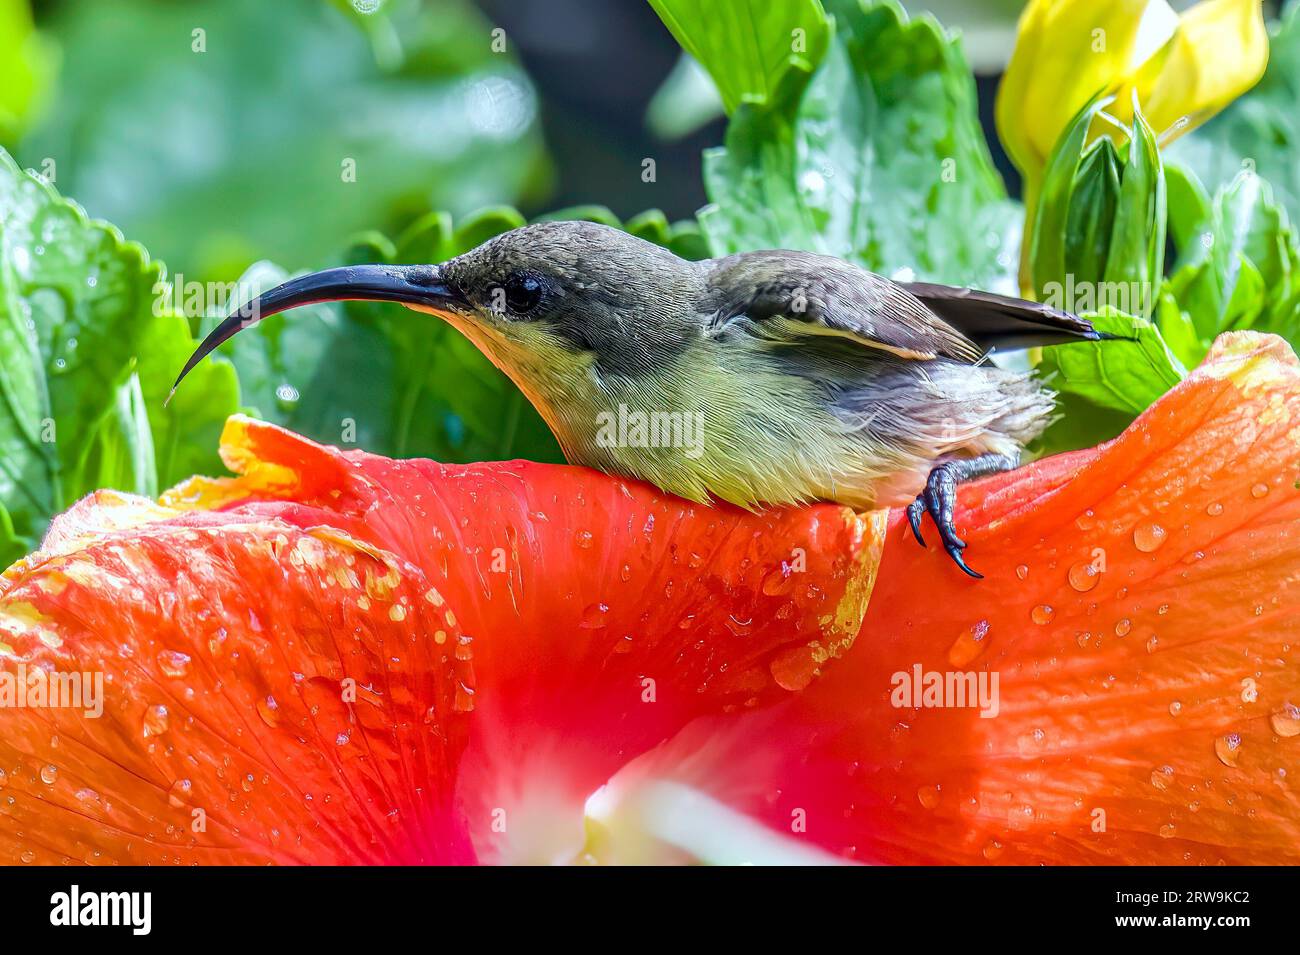 A closeup of a Loten's sunbird perched on a red flower with a blurry background Stock Photo